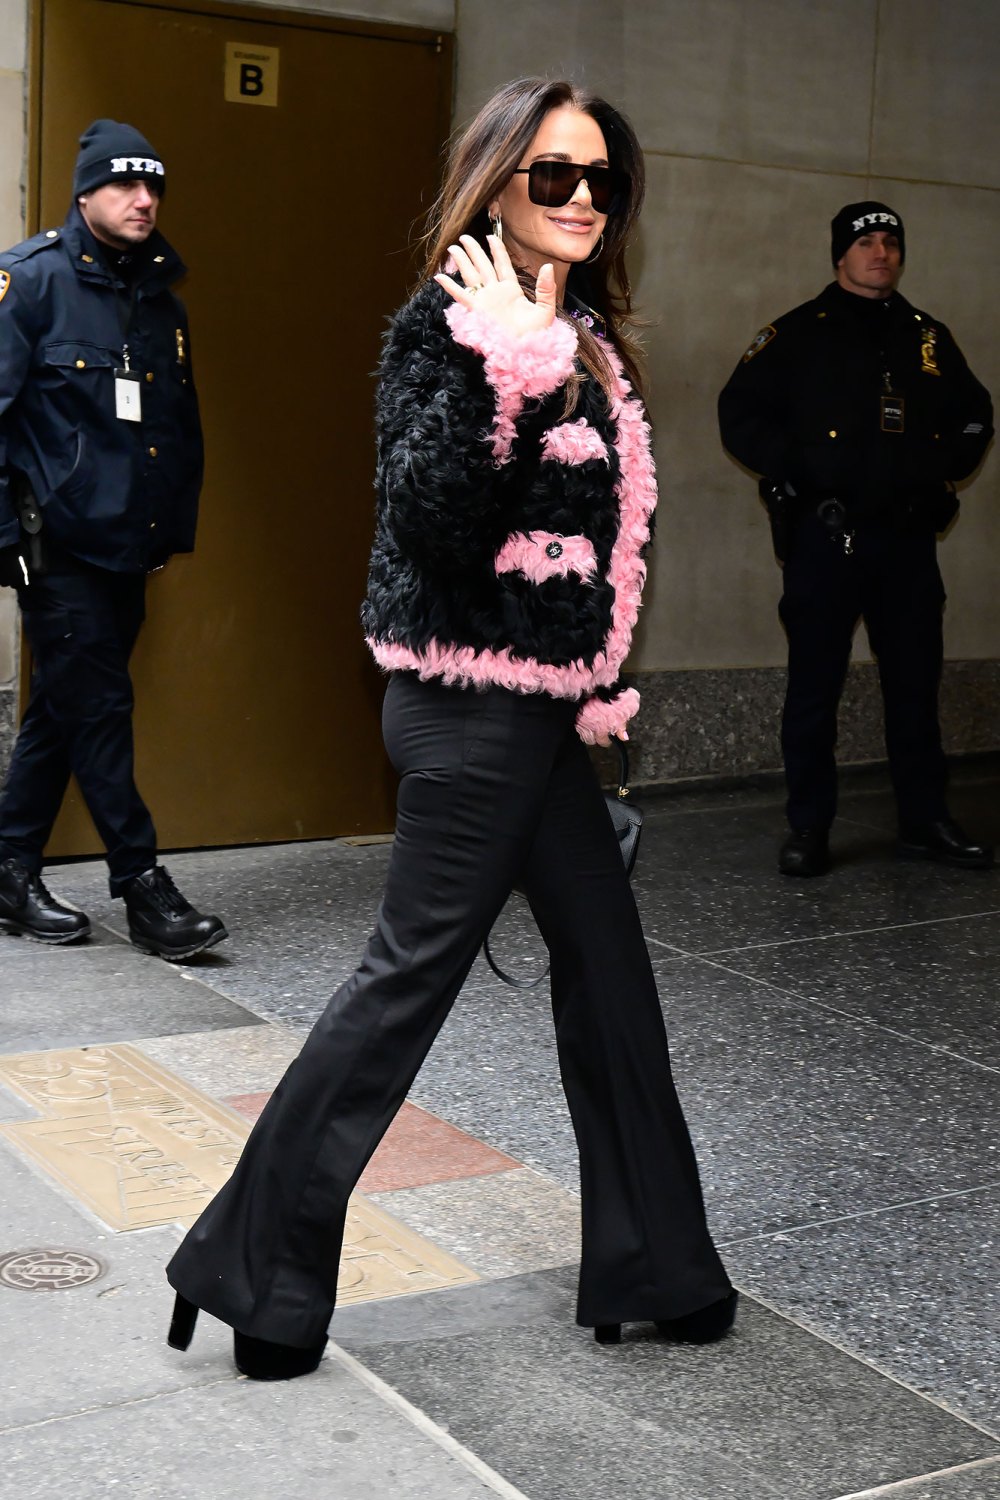 Kyle Richards Channels Her Inner French Girl in Black and Pink Cropped Shearling Jacket